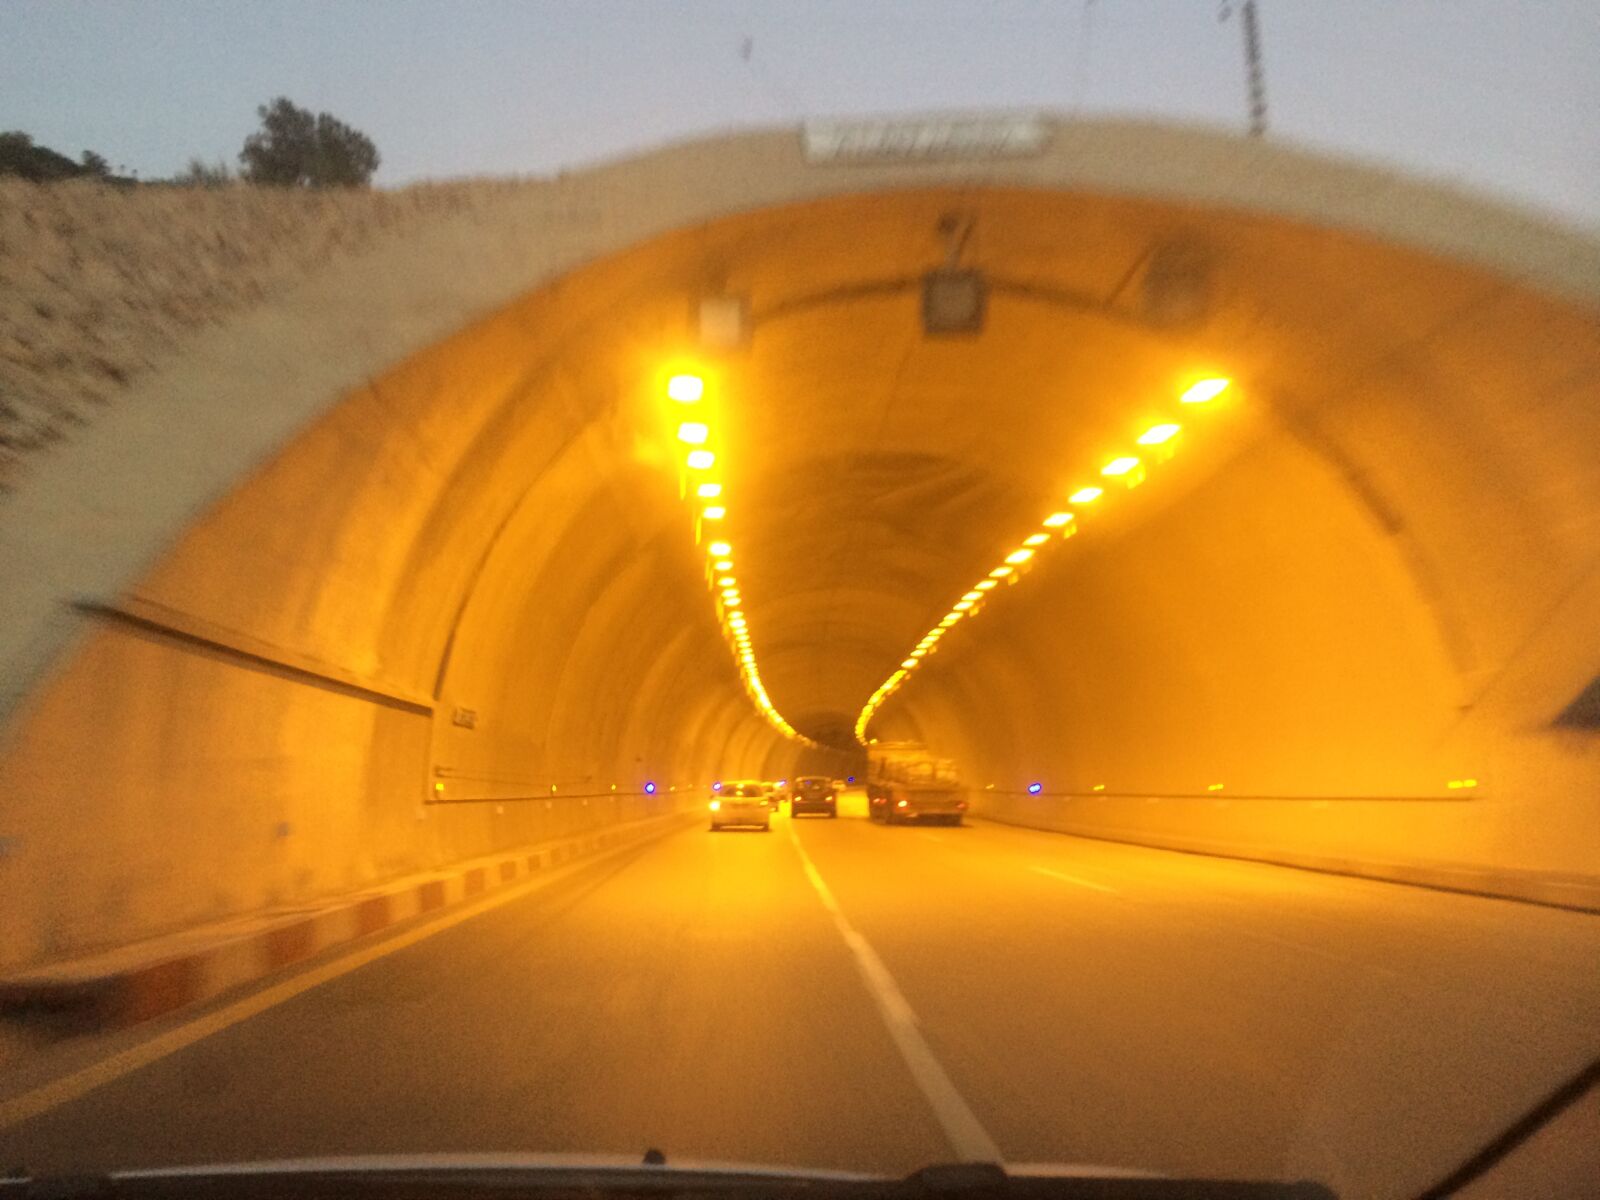 Apple iPhone 5s + iPhone 5s back camera 4.12mm f/2.2 sample photo. Entre ville, eclairage, tunnel photography